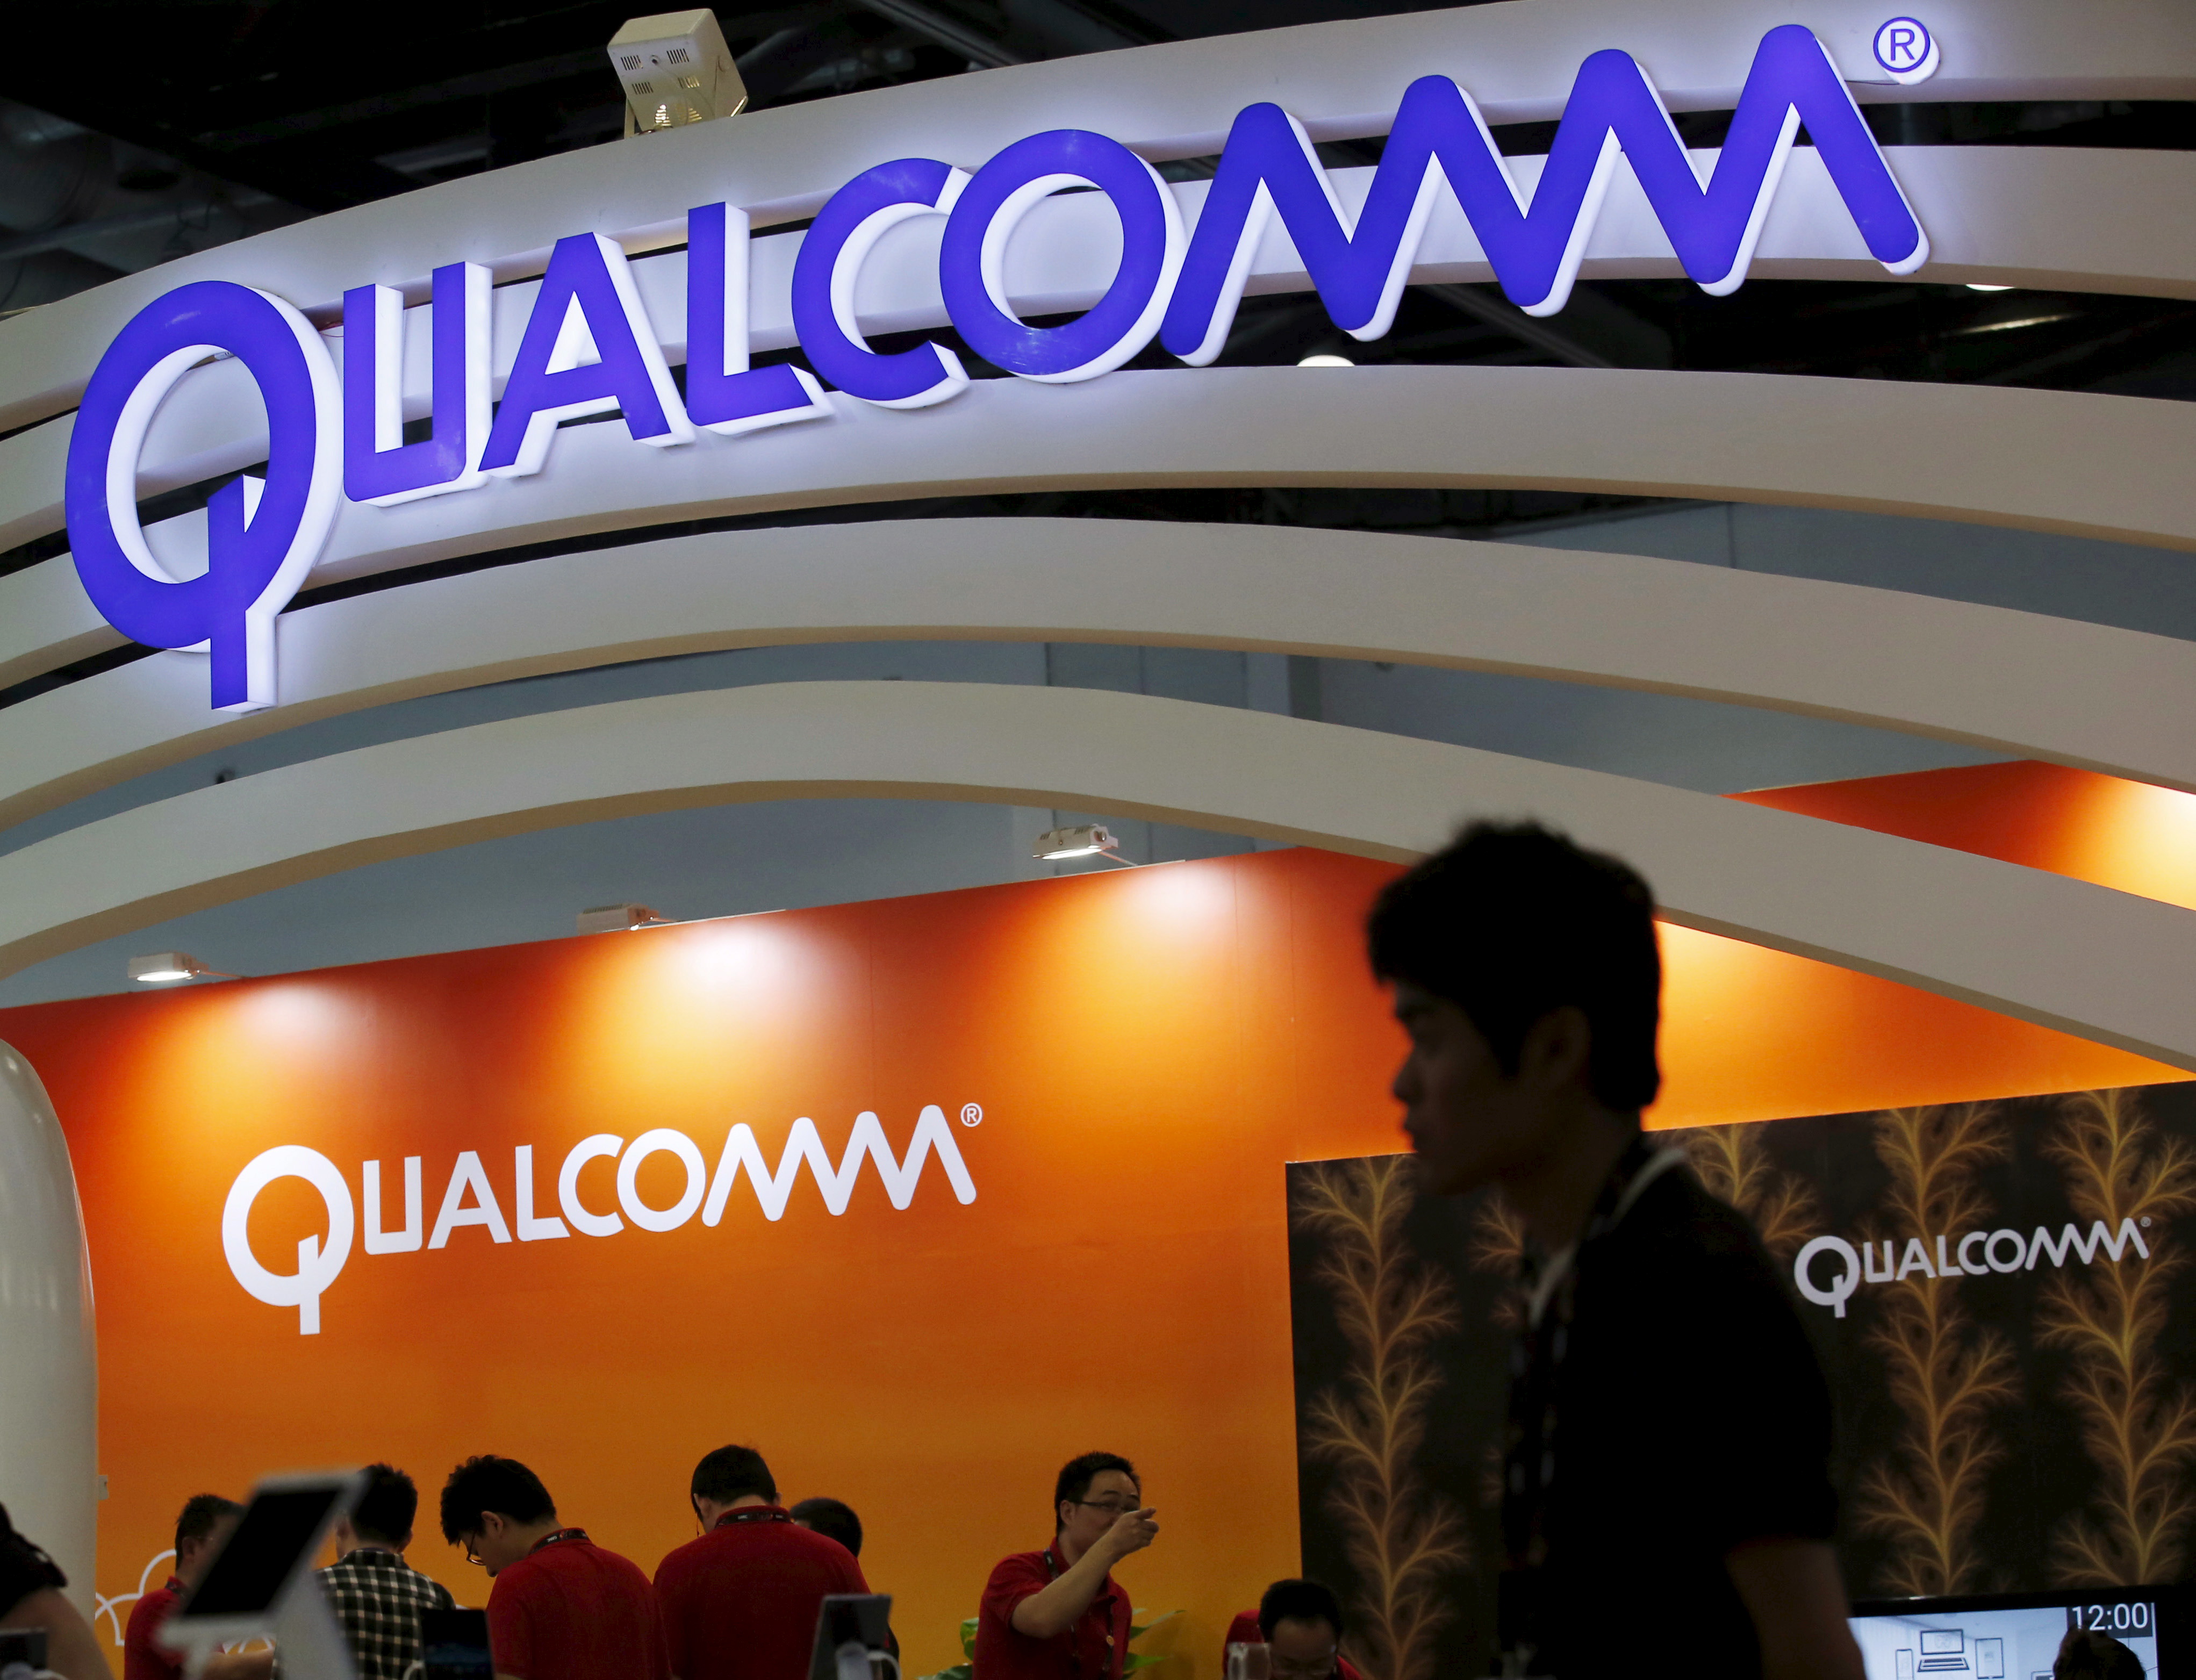 Qualcomm's logo is seen at its booth at the Global Mobile Internet Conference